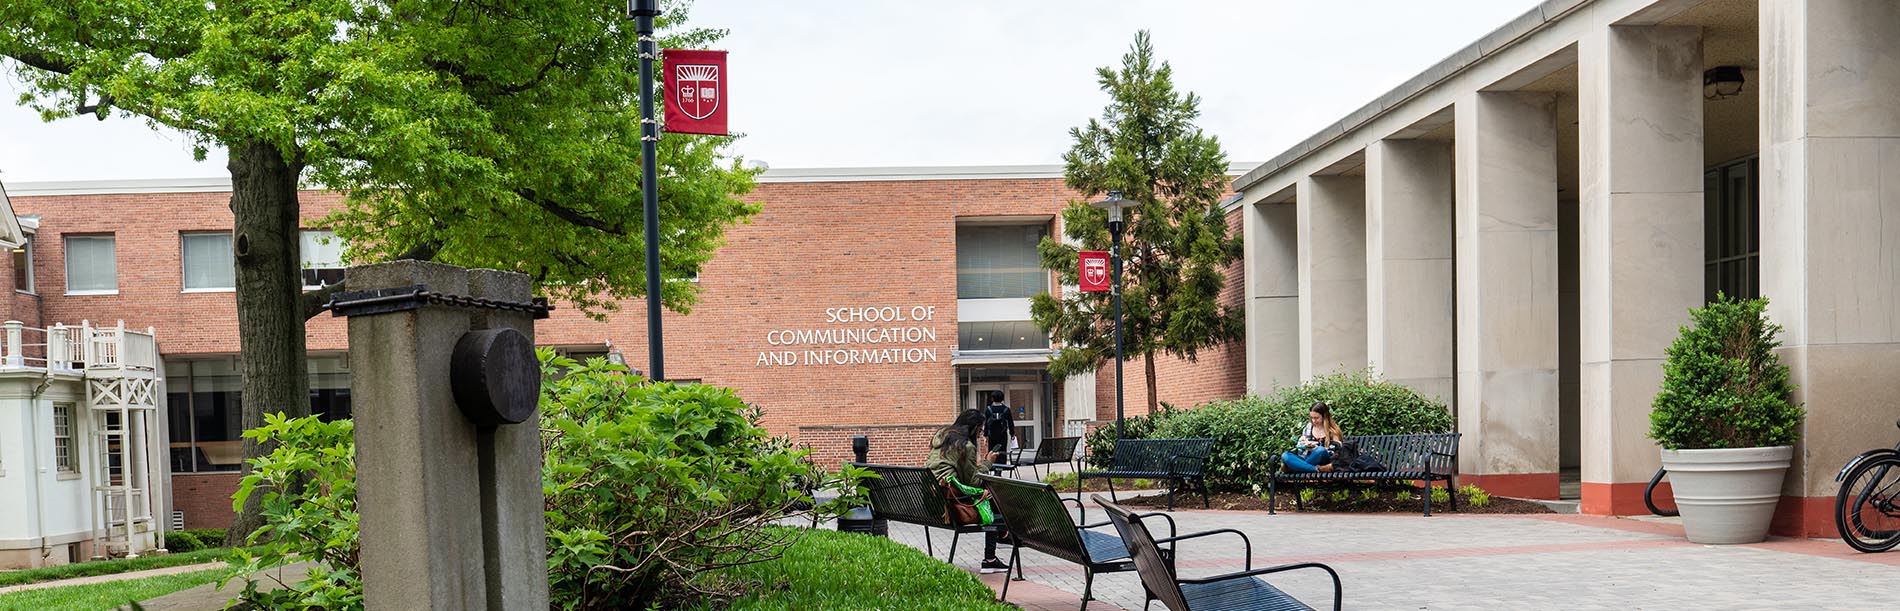 Rutgers School of Communication and Information Building